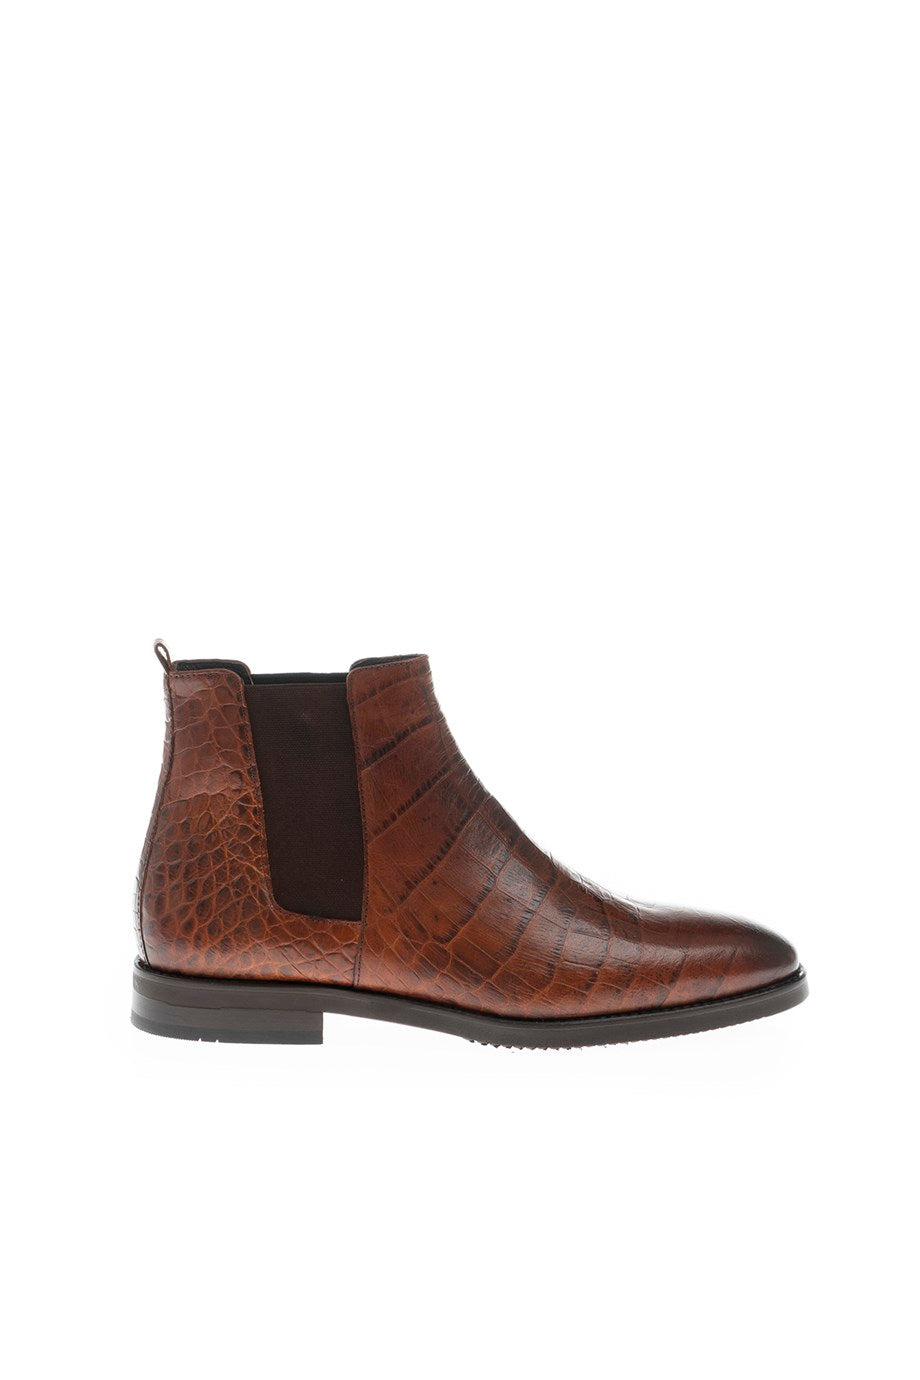 Eva Sole Crocodile Patterned Boots - MENSTYLEWITH